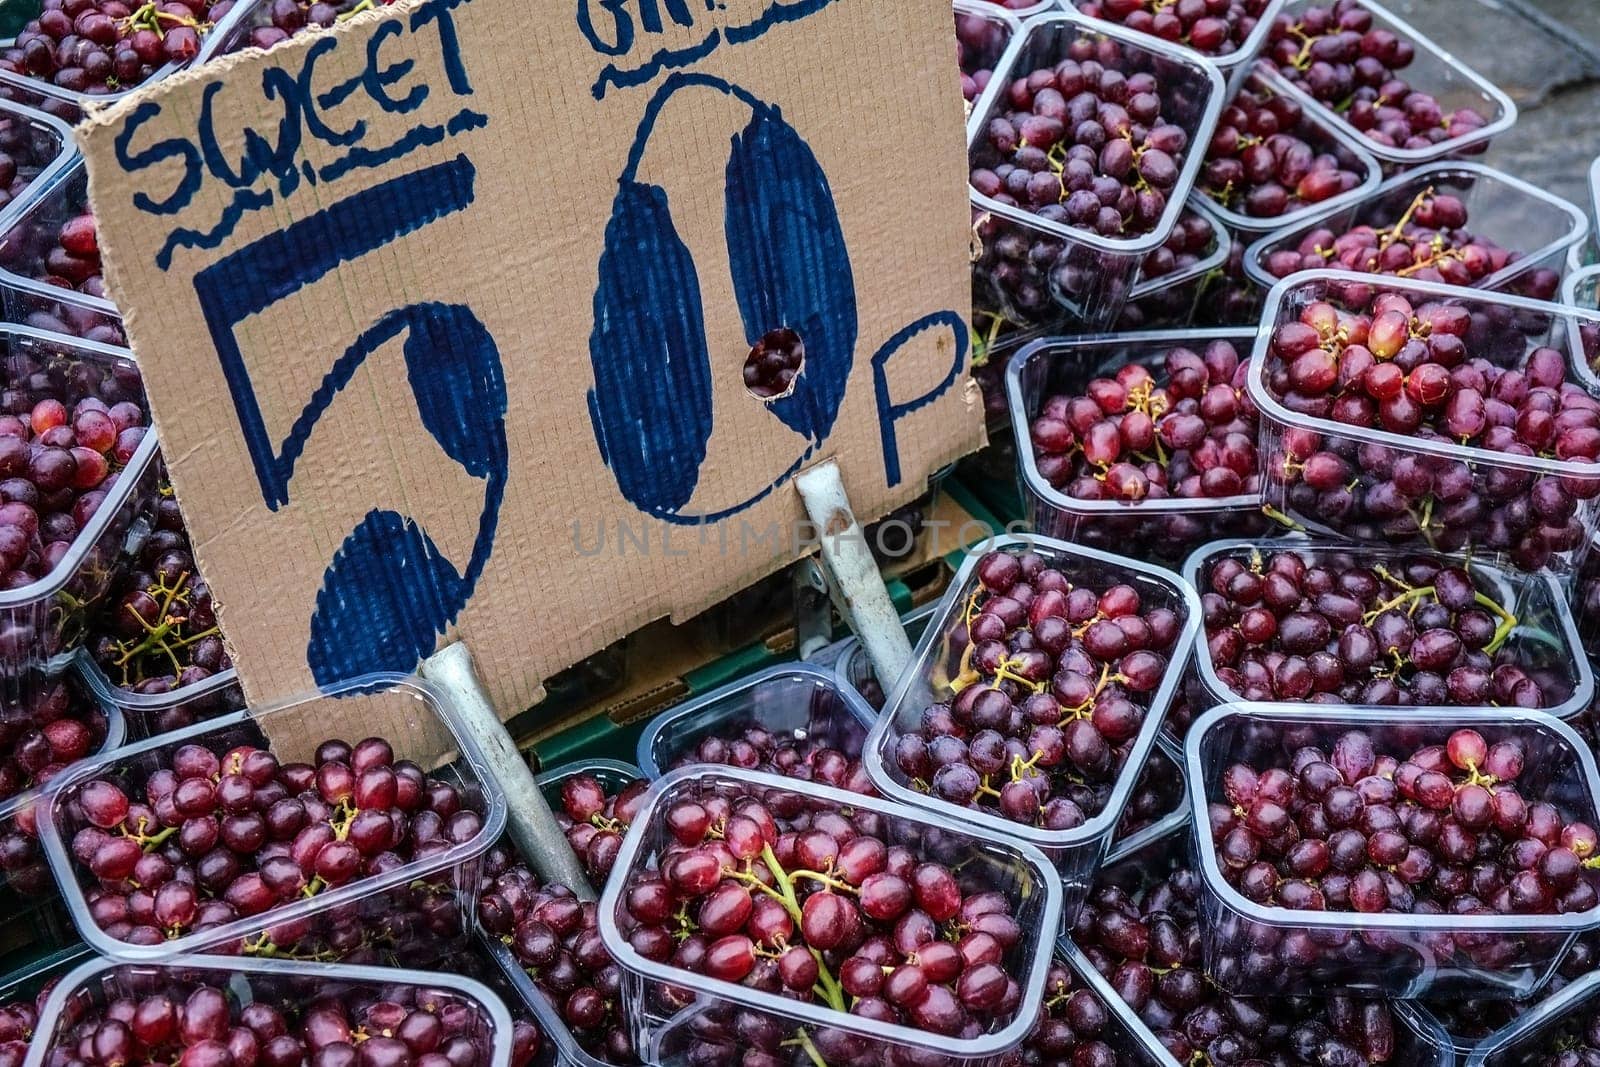 Small plastic boxes with red grapes displayed on food market at Lewisham, London